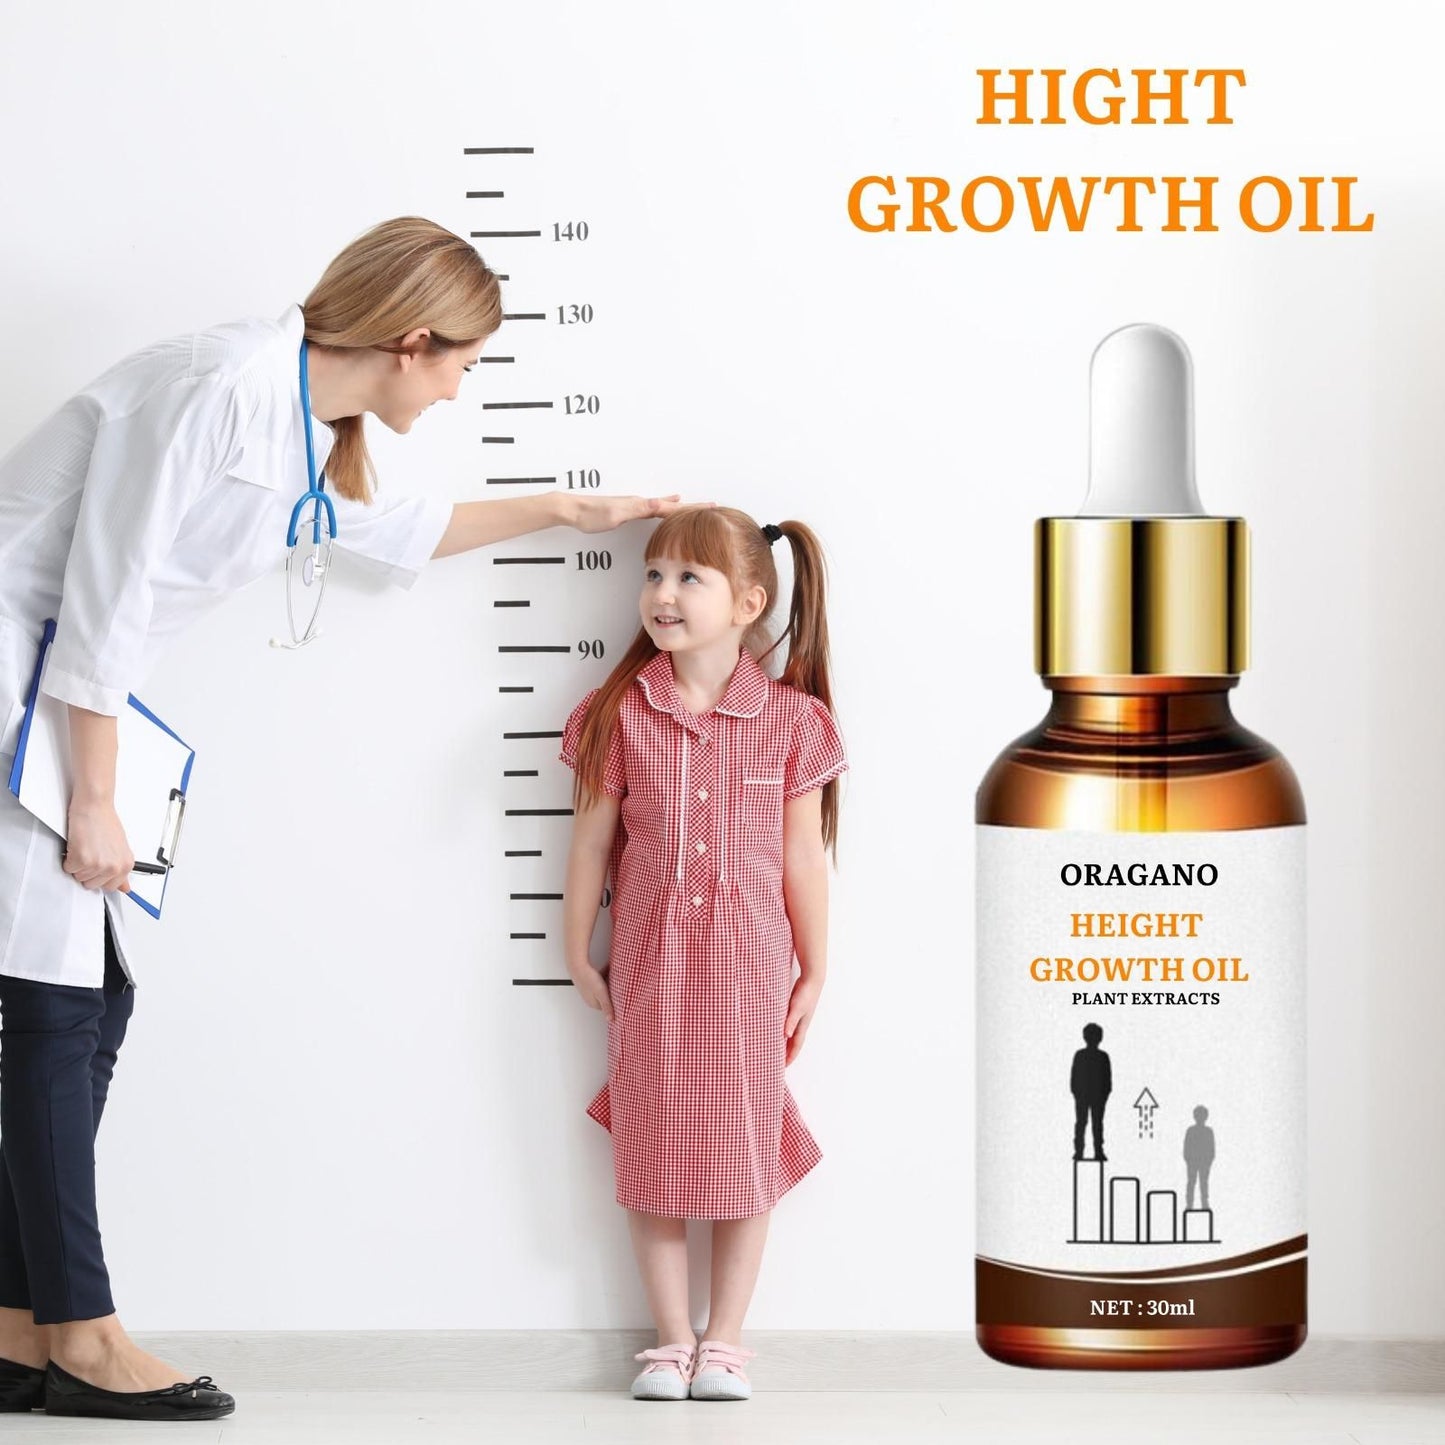 Oragano height Growth Oil (BUY 1 GET 1 FREE)